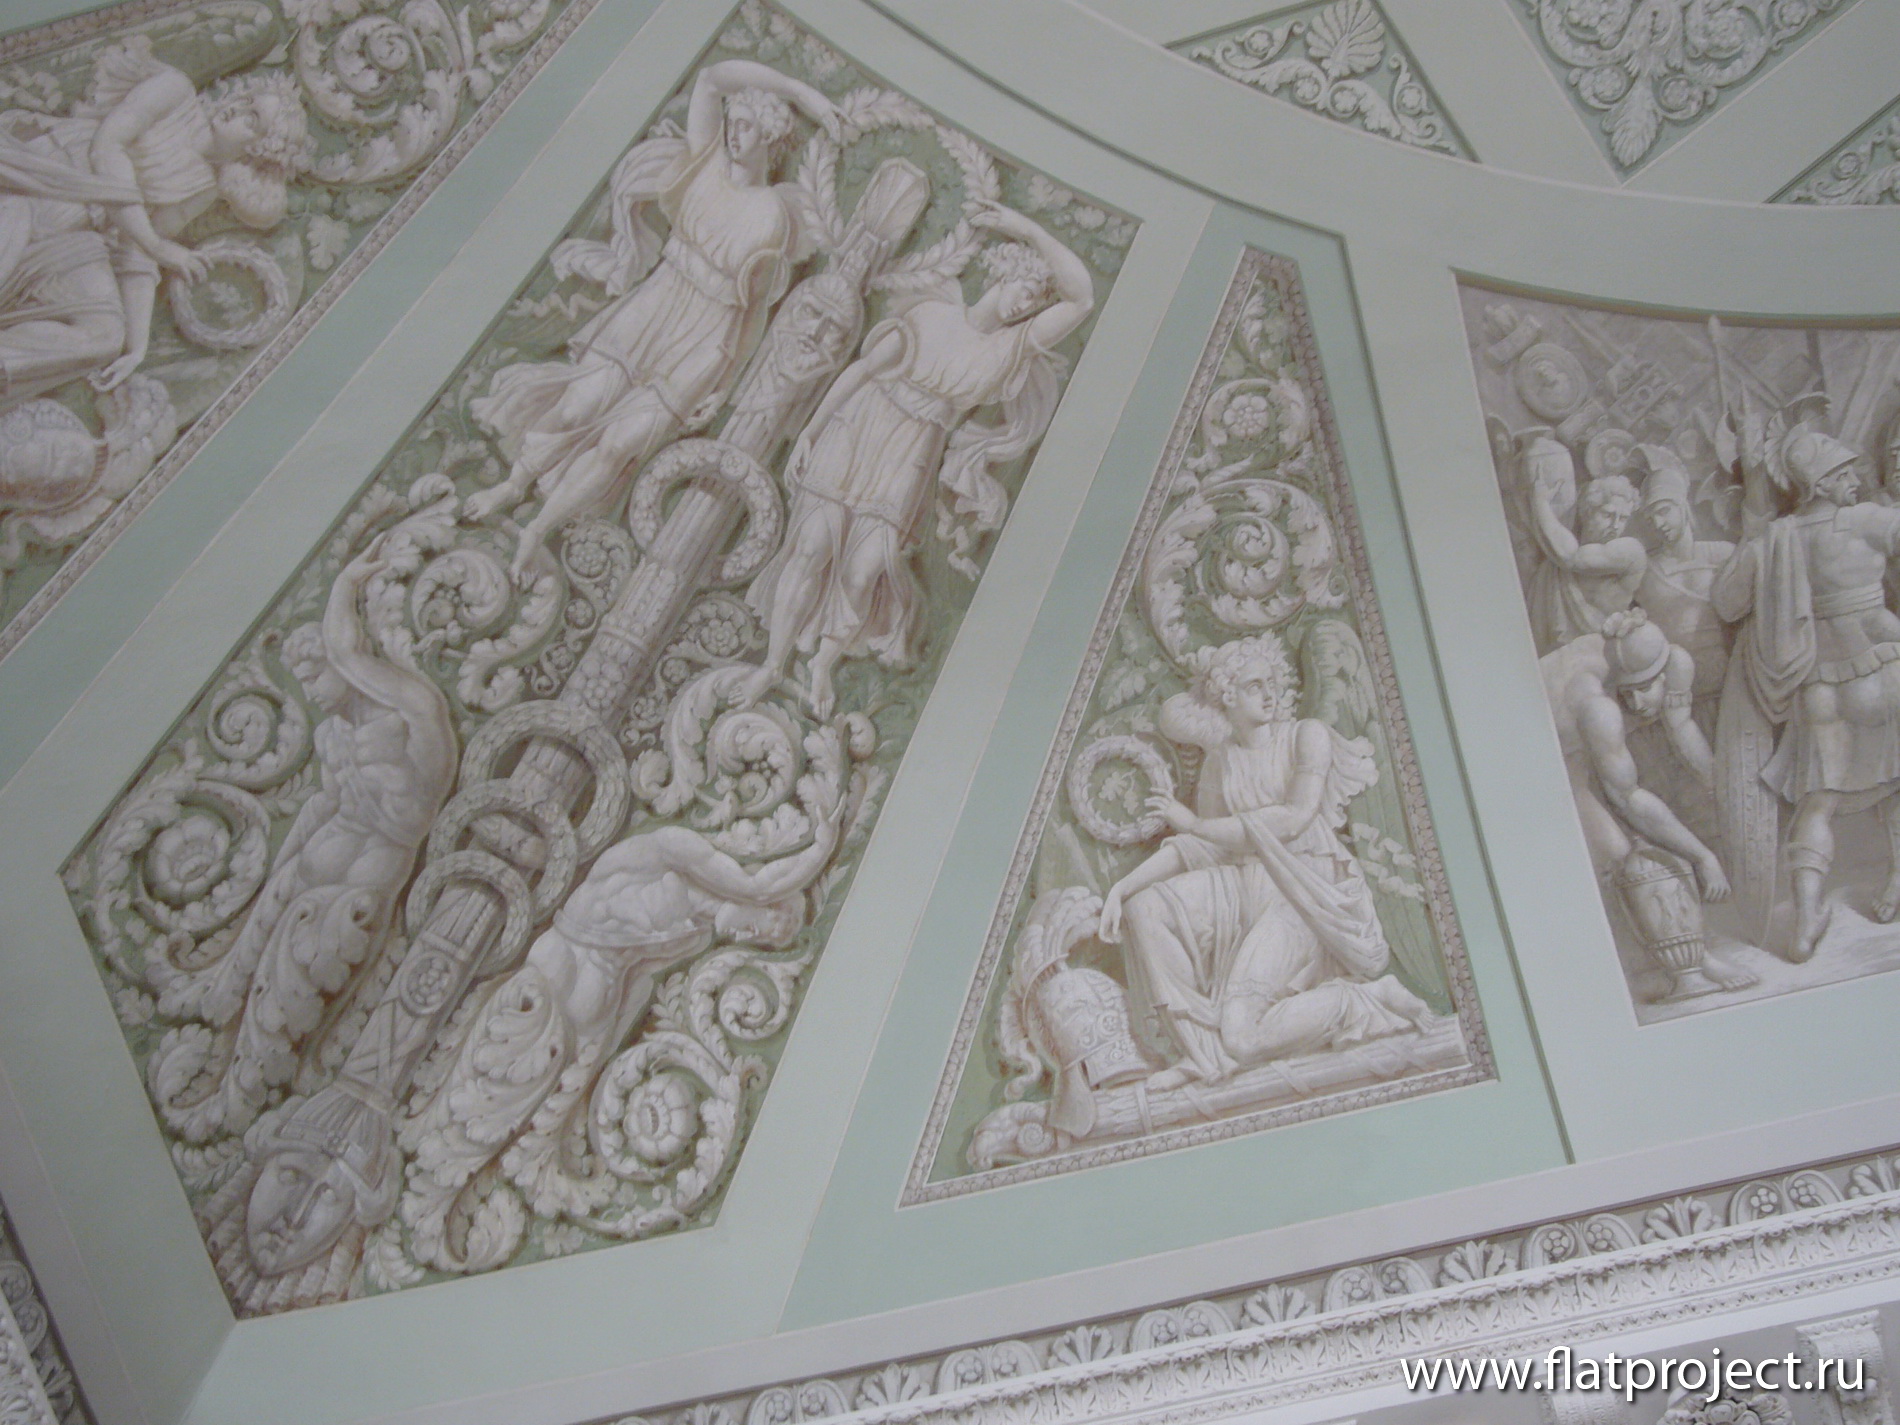 The State Russian museum interiors – photo 22